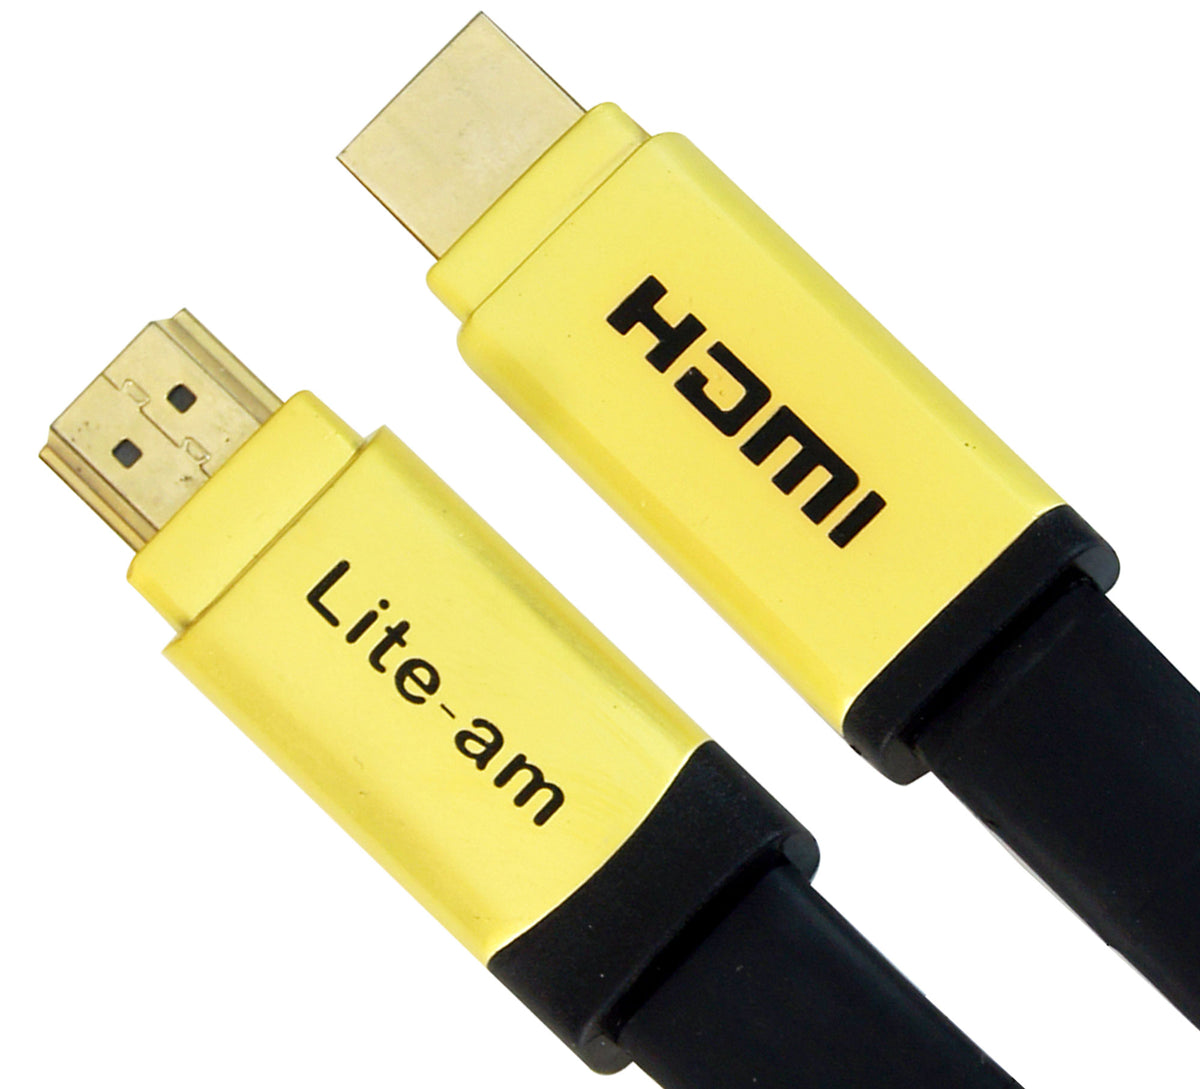 Cable hdmi 7m - Cdiscount